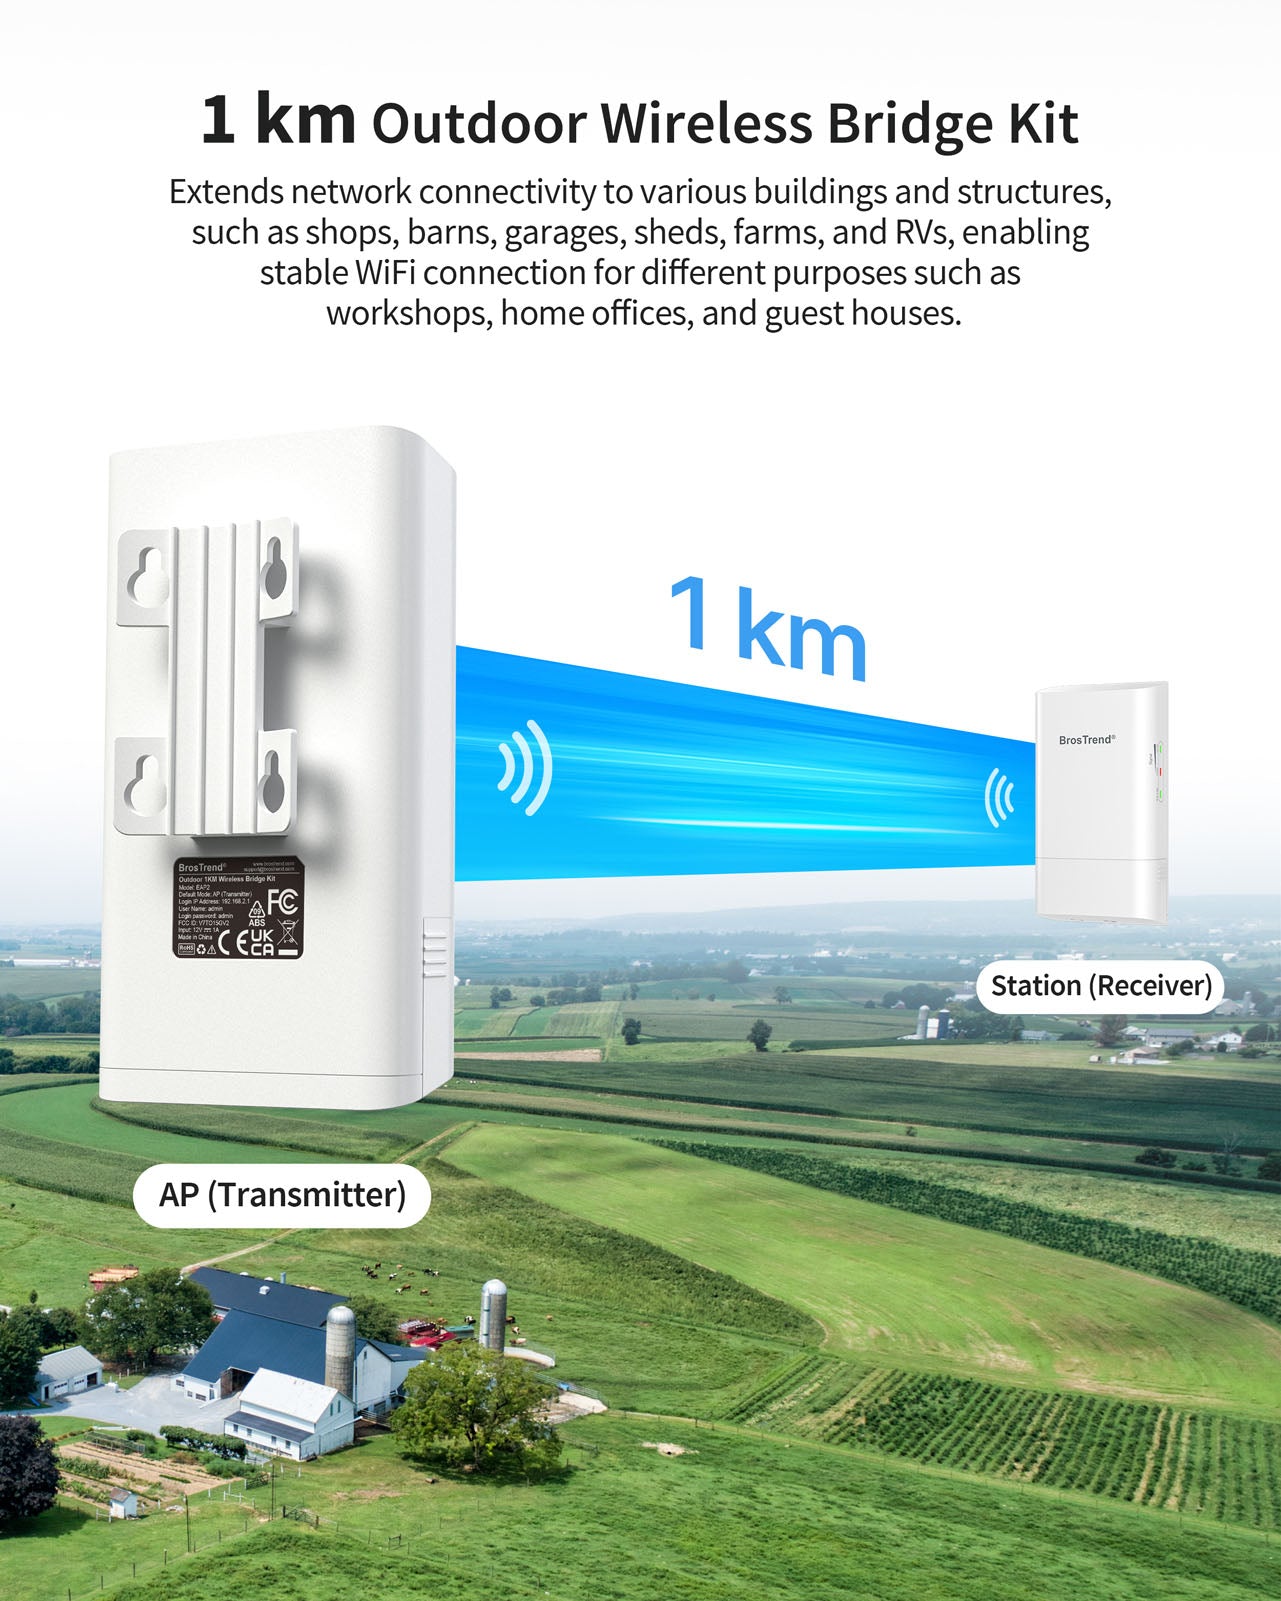 Outdoor WiFi Bridge Is Used to Create Internet Access from a Main House to a Shop Barn Garage Shed Farm RV or Any Outdoor Structure It Extends Network Connectivity to Another Building up to 1 Kilometer Long Range Distance